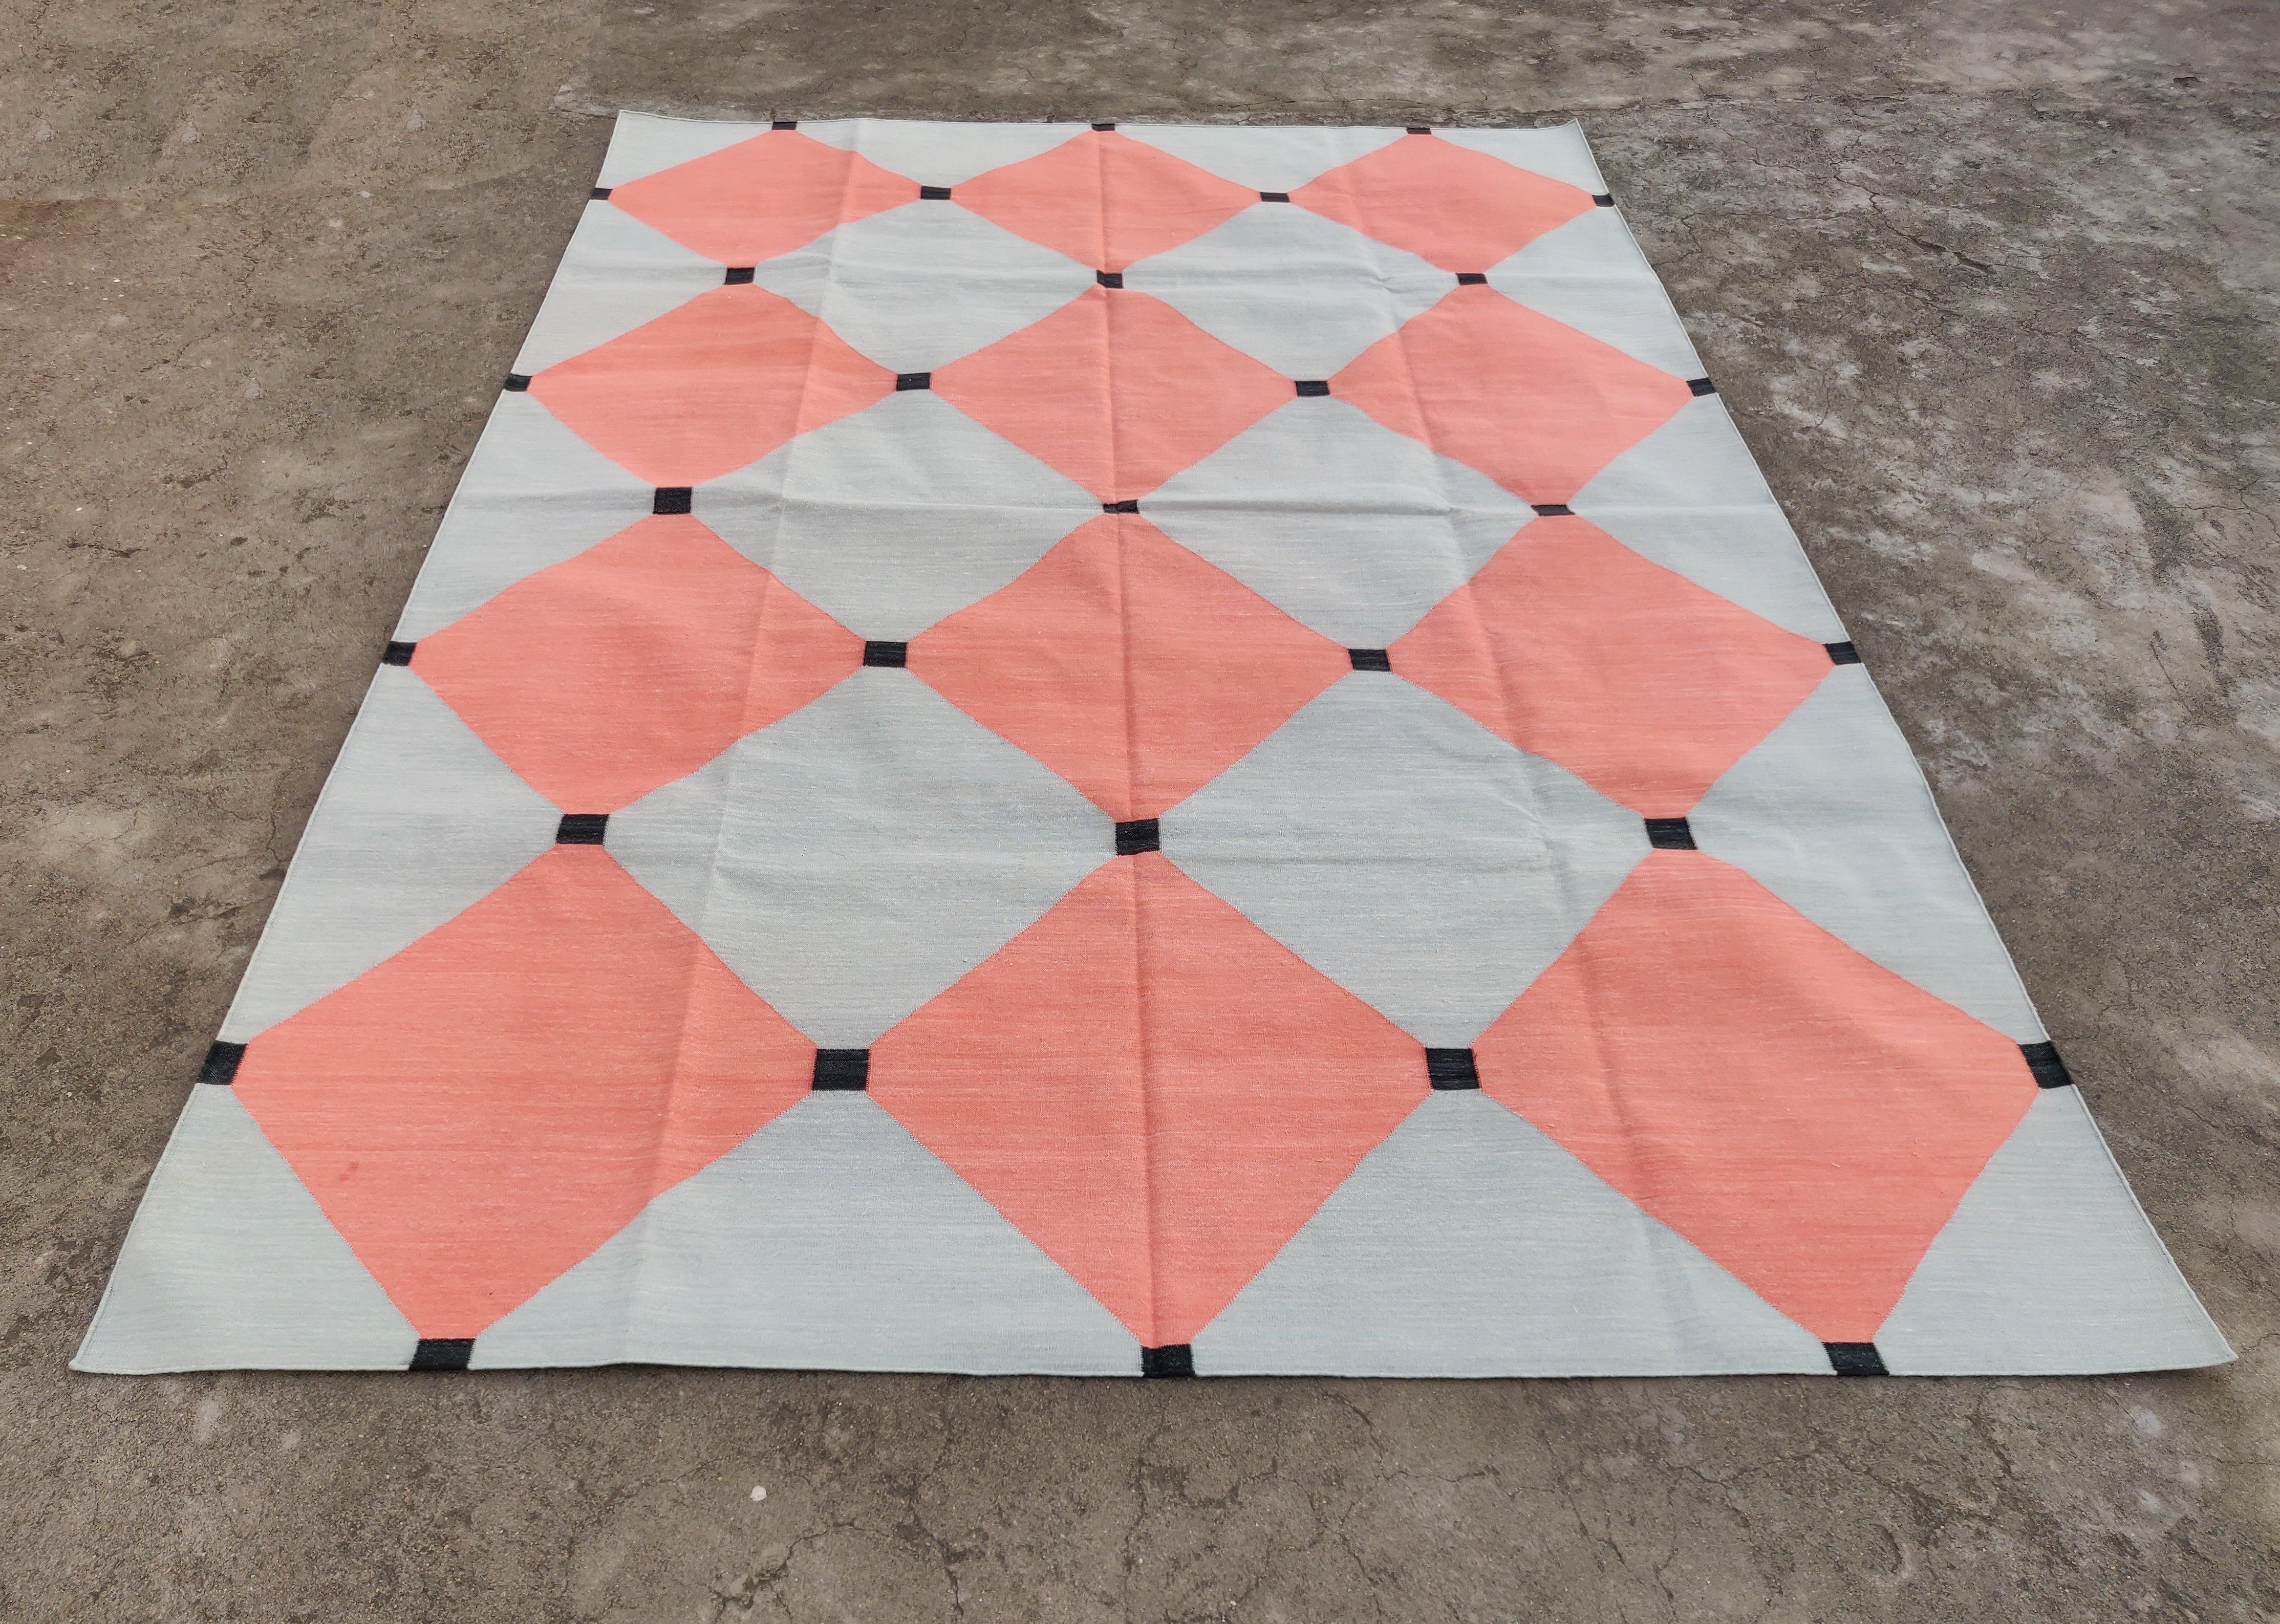 Hand-Woven Handmade Cotton Area Flat Weave Rug, 6x9 Grey And Coral Tile Patterned Dhurrie For Sale